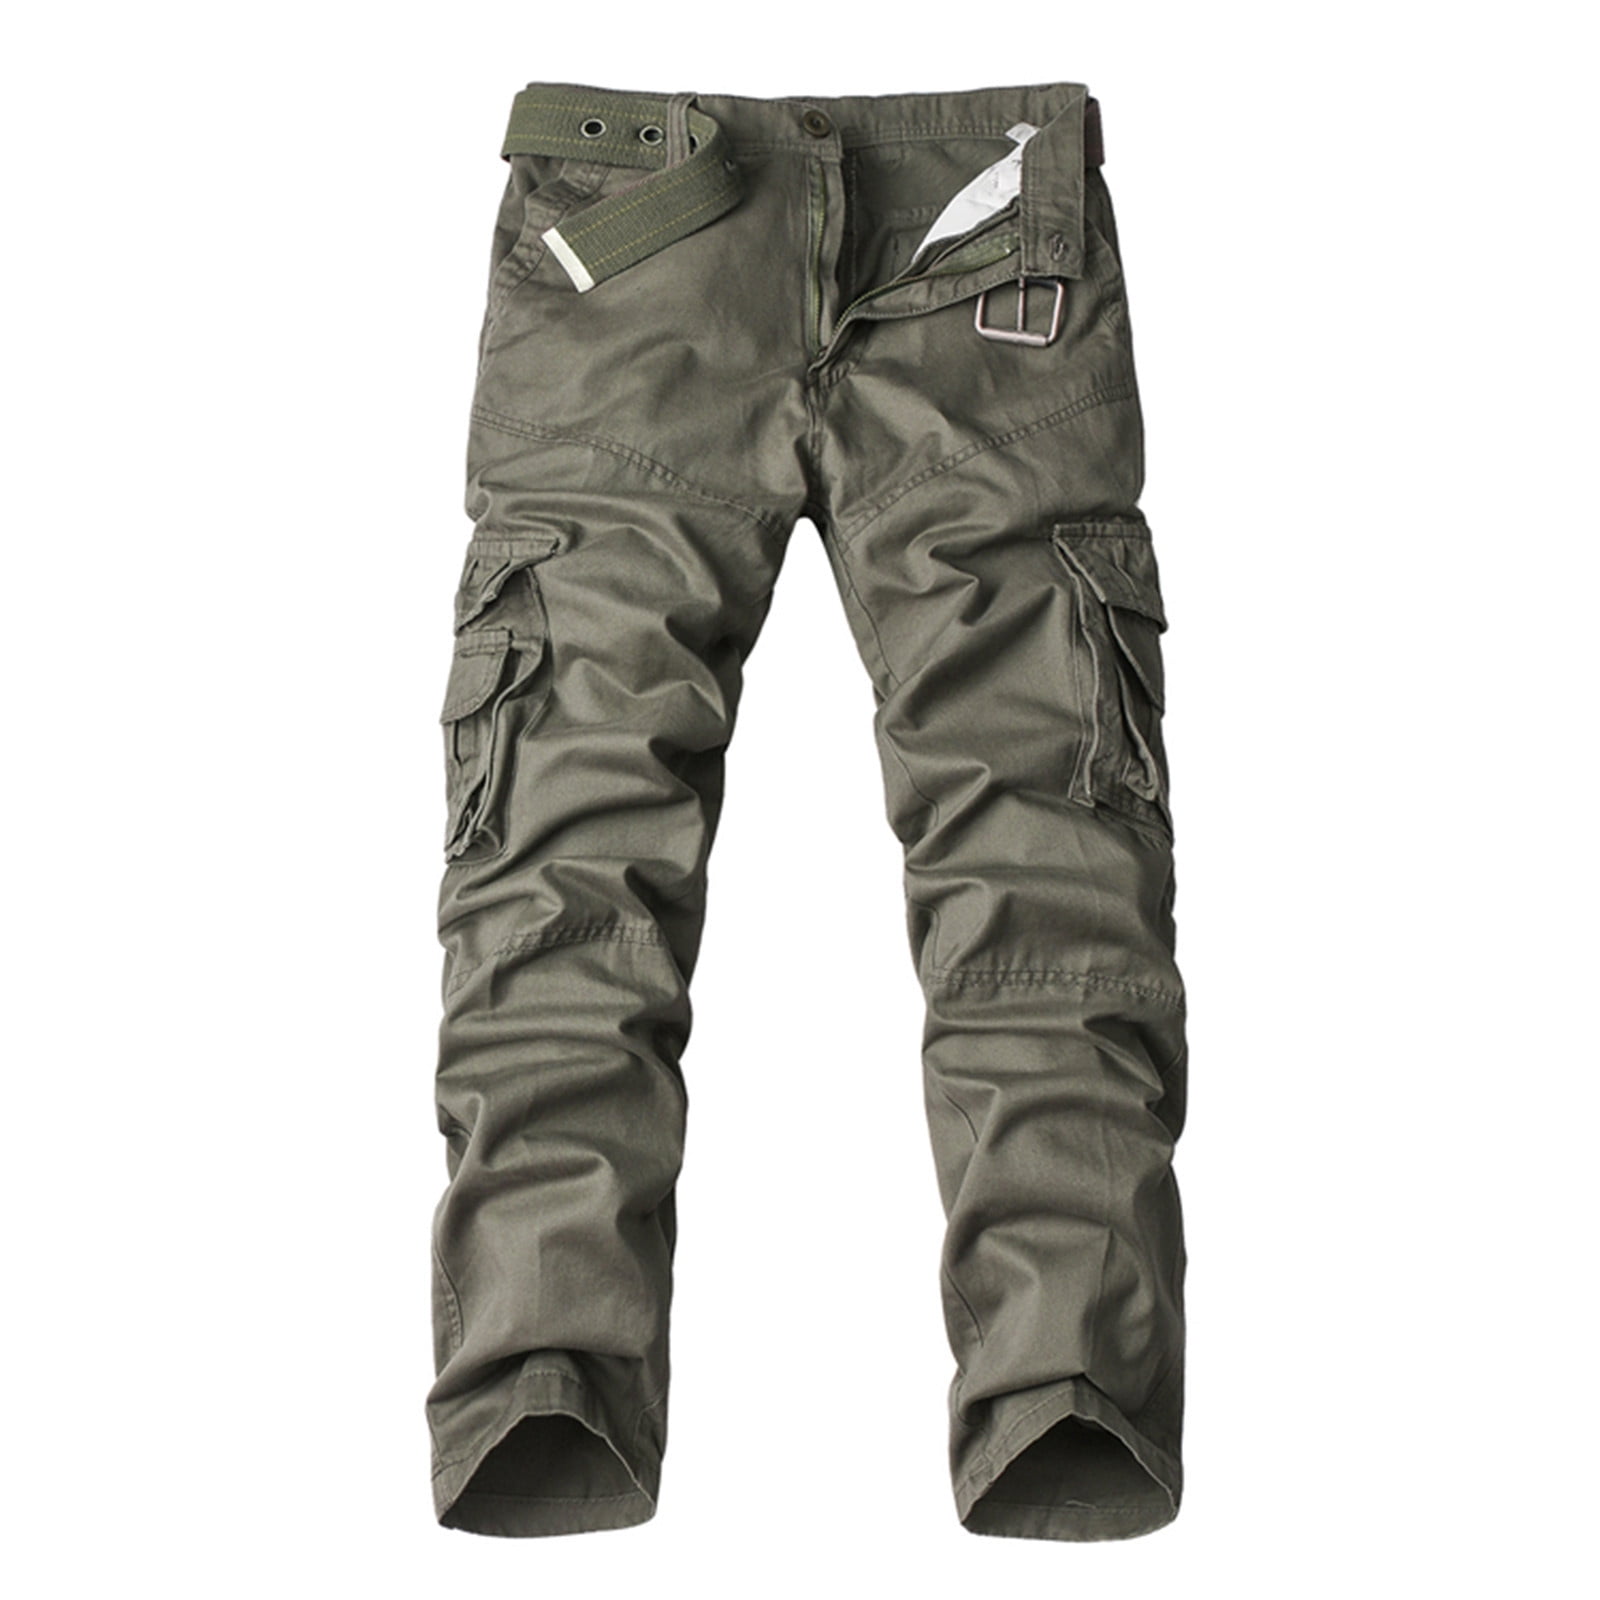 cllios Deals Of The Week Men's Cargo Pants Big and Tall Multi